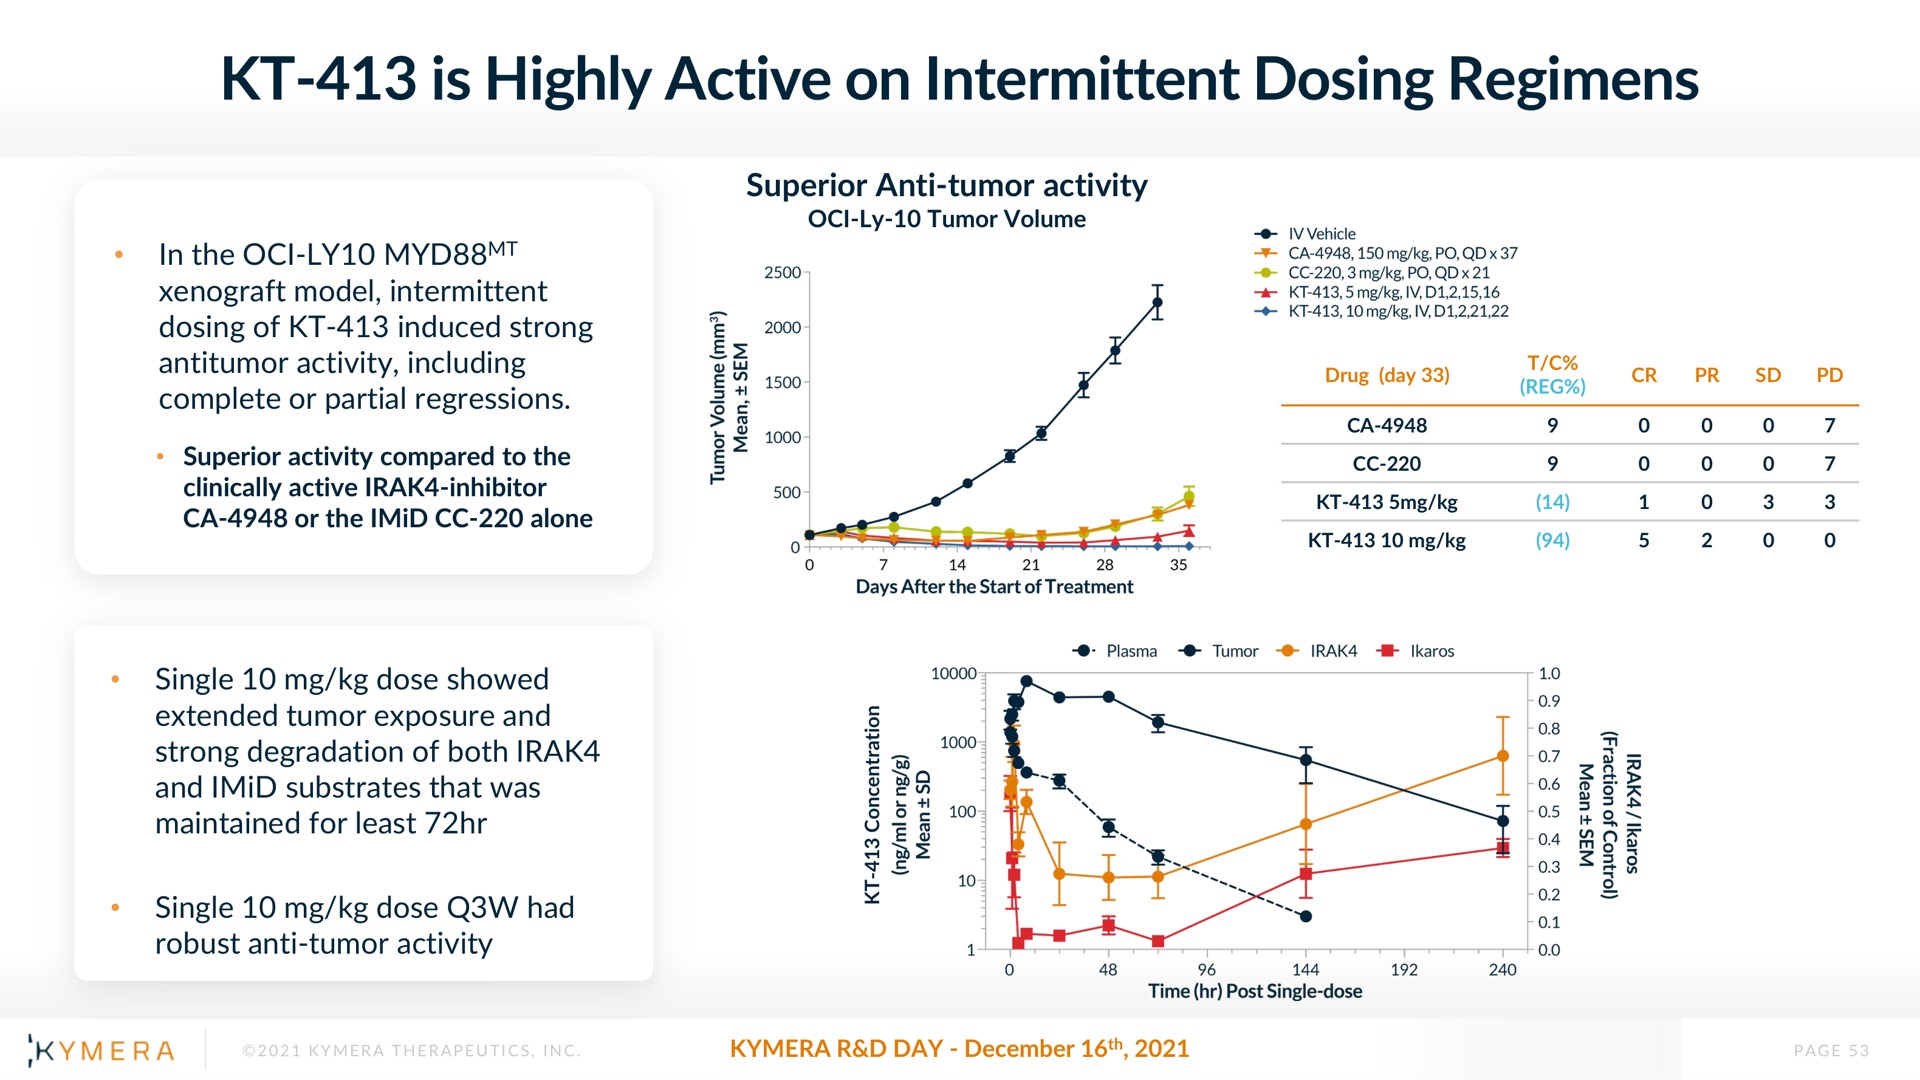 is highly active on intermittent dosing regimens | Kymera